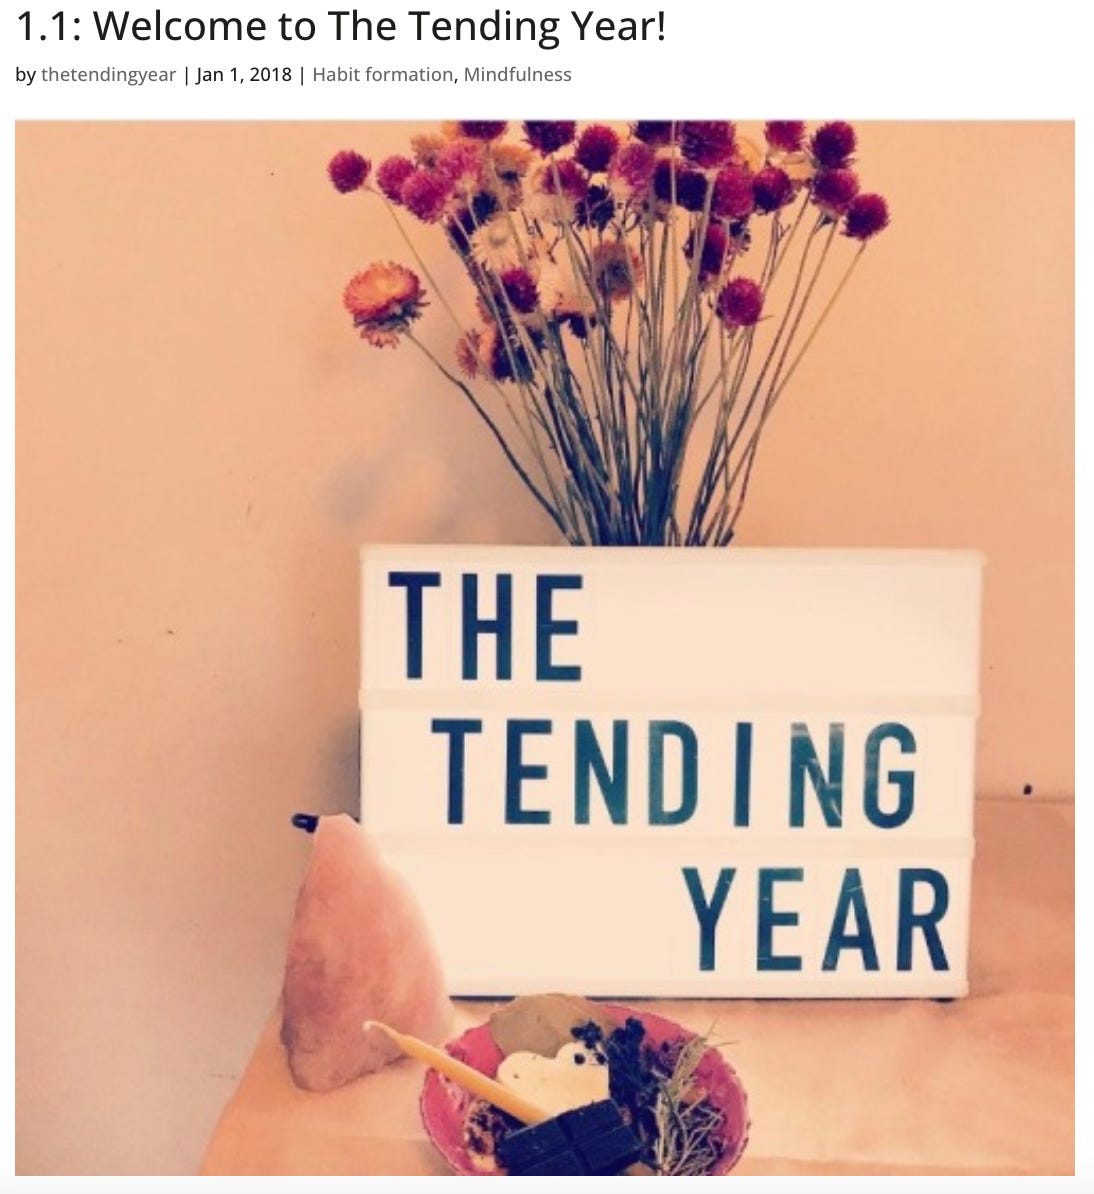 Screenshot of Kate’s very first blog post in 2018! Image shows a light box that says “The Tending Year,” a chunk of rose quartz, a vase of dried flowers, and a bowl with flowers and a candle.